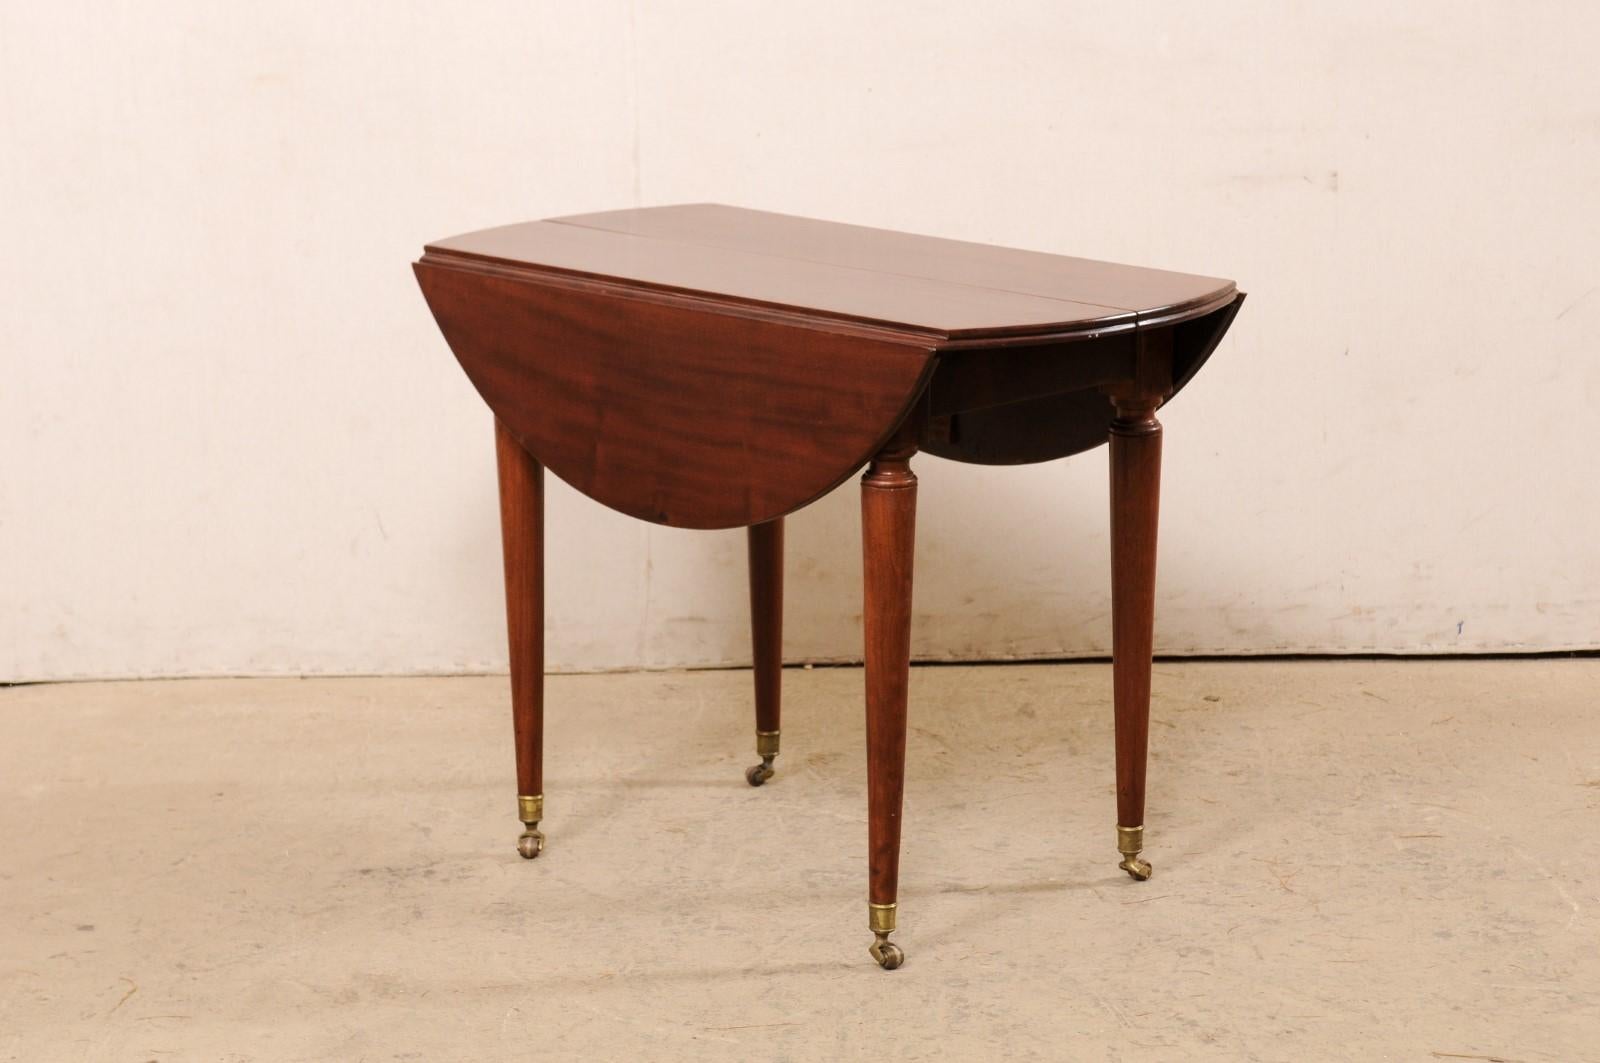 A French mahogany drop-leaf table from the late 19th century. This antique table from France has dual drop-leaf sides that when opened, create an over all round shape. The table is presented upon four round and gently tapering legs, which each